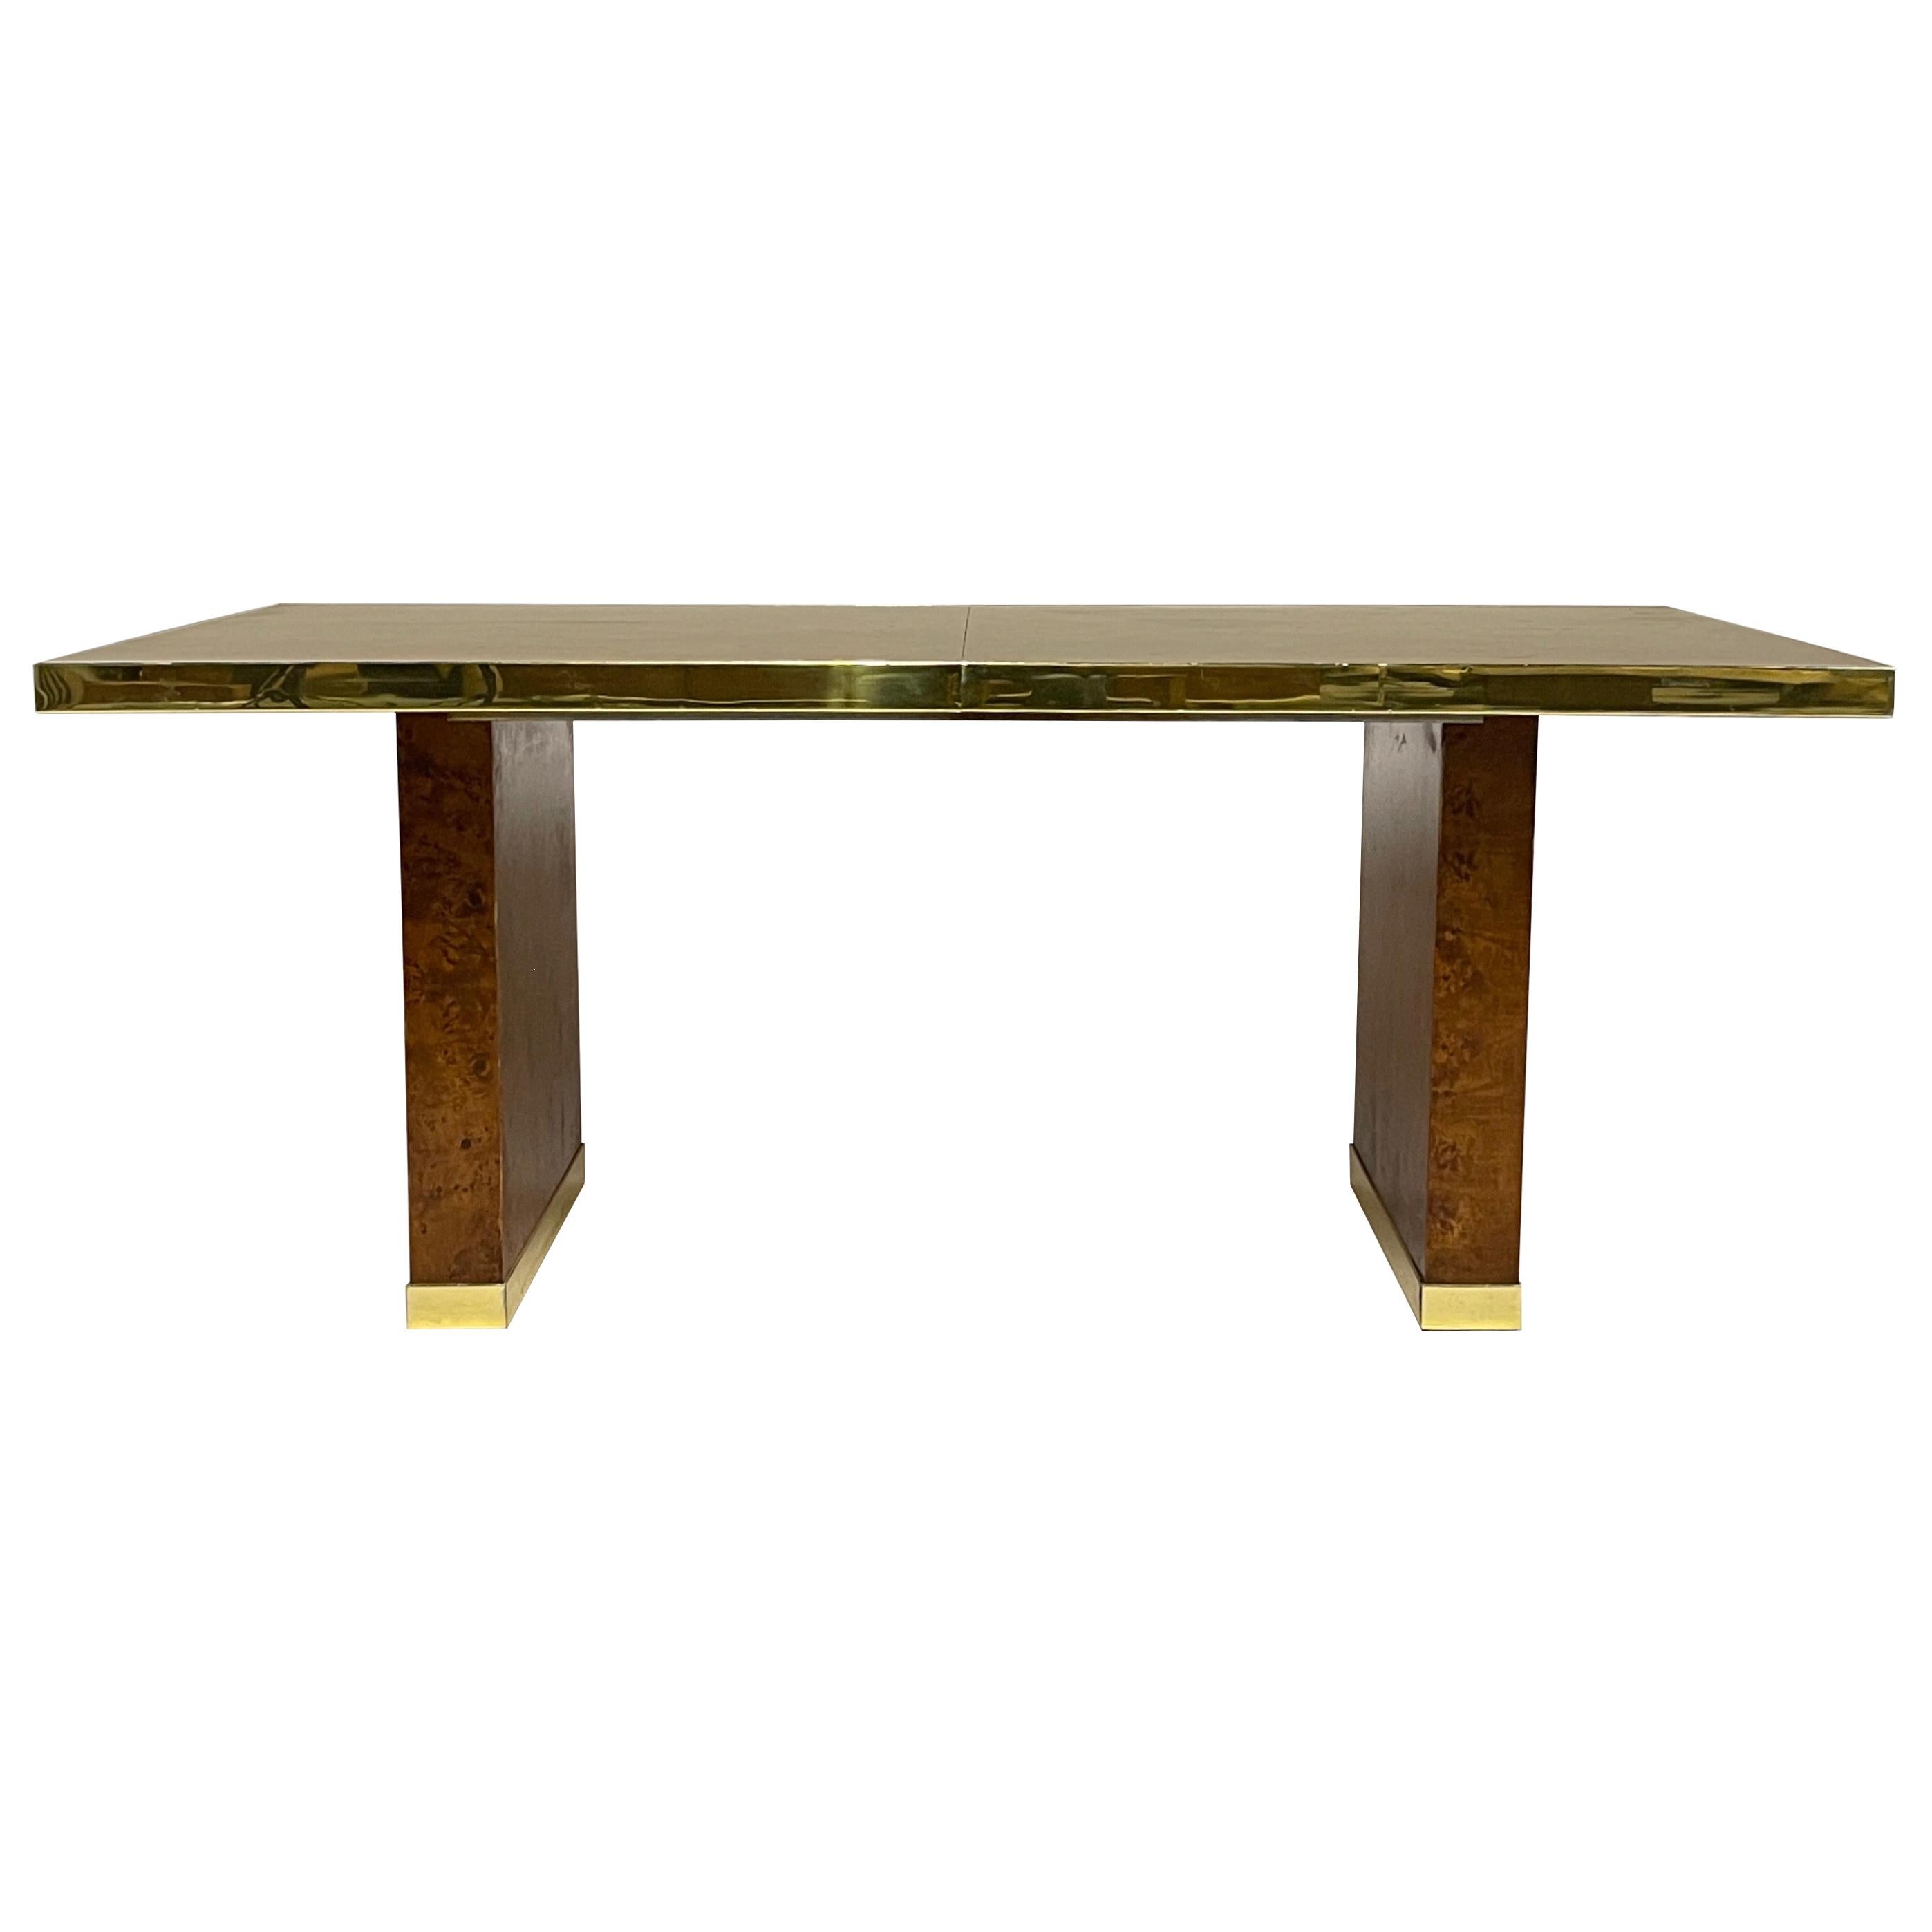 1970s Signed Pierre Cardin Olive Burl and Brass Extension Dining Table or Desk